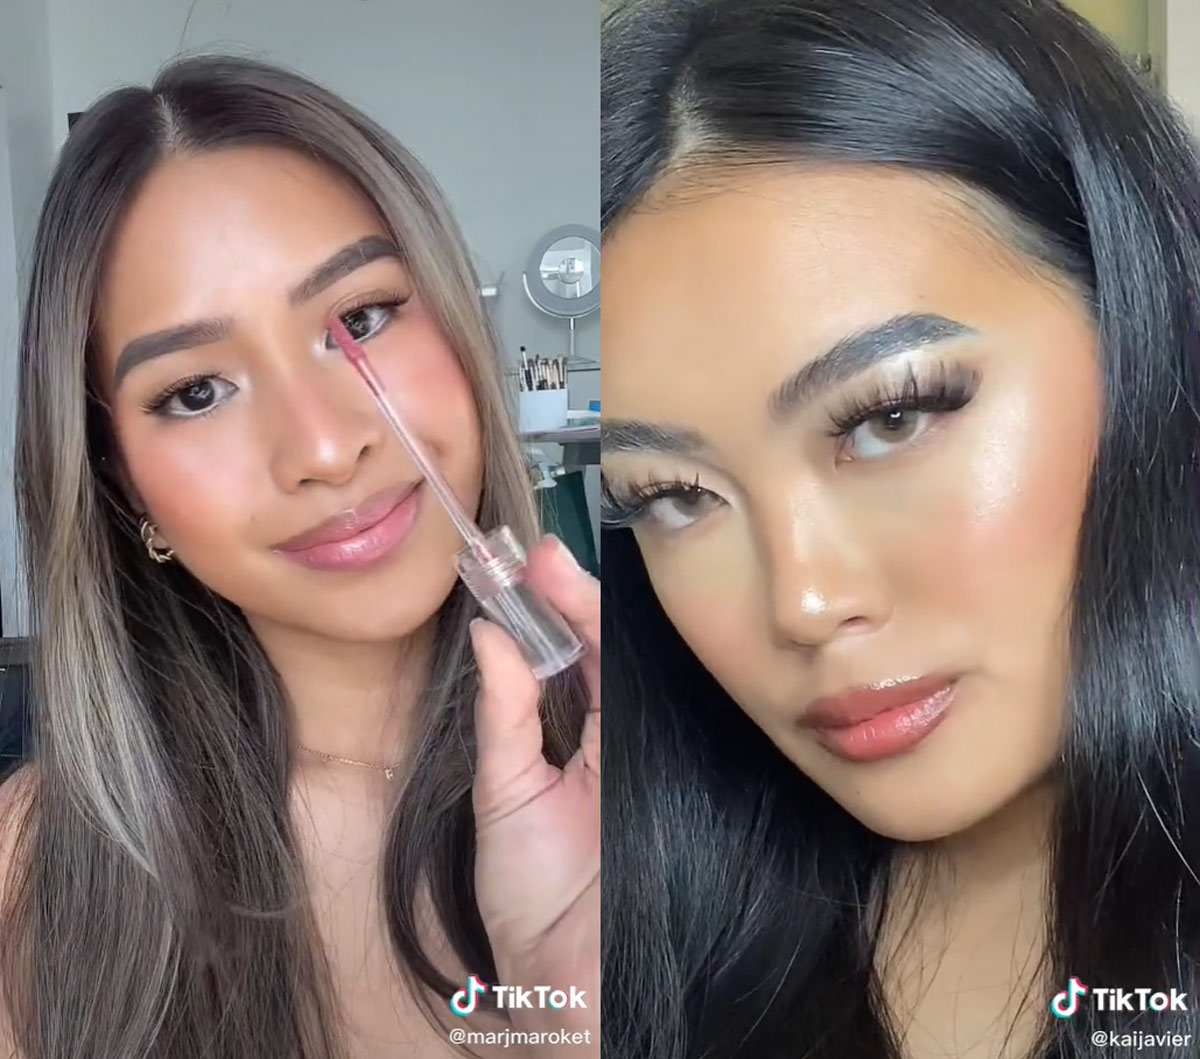 Tutorial: How to Do the Viral Perfect Lip Shade TikTok Trend